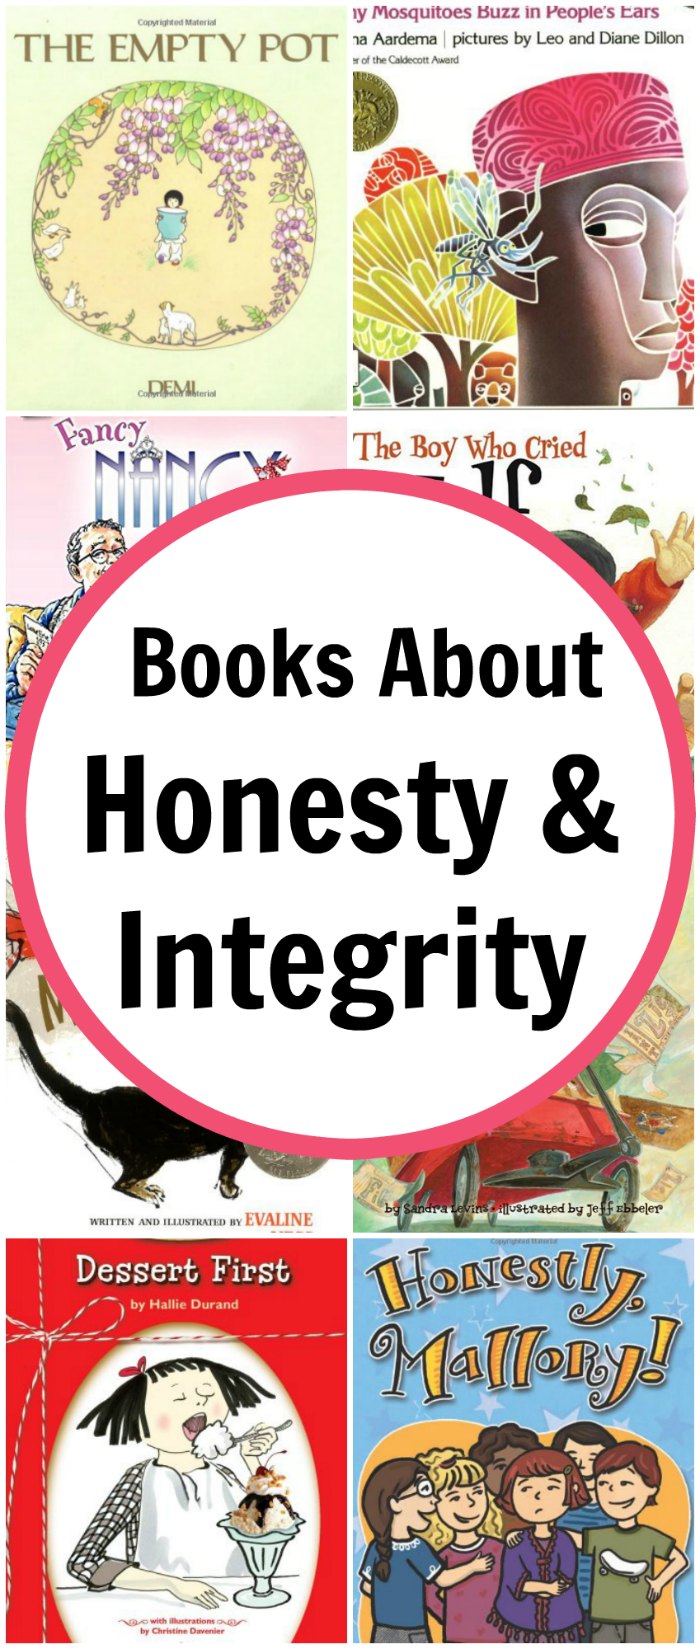 Books About Honesty & Integrity for Children